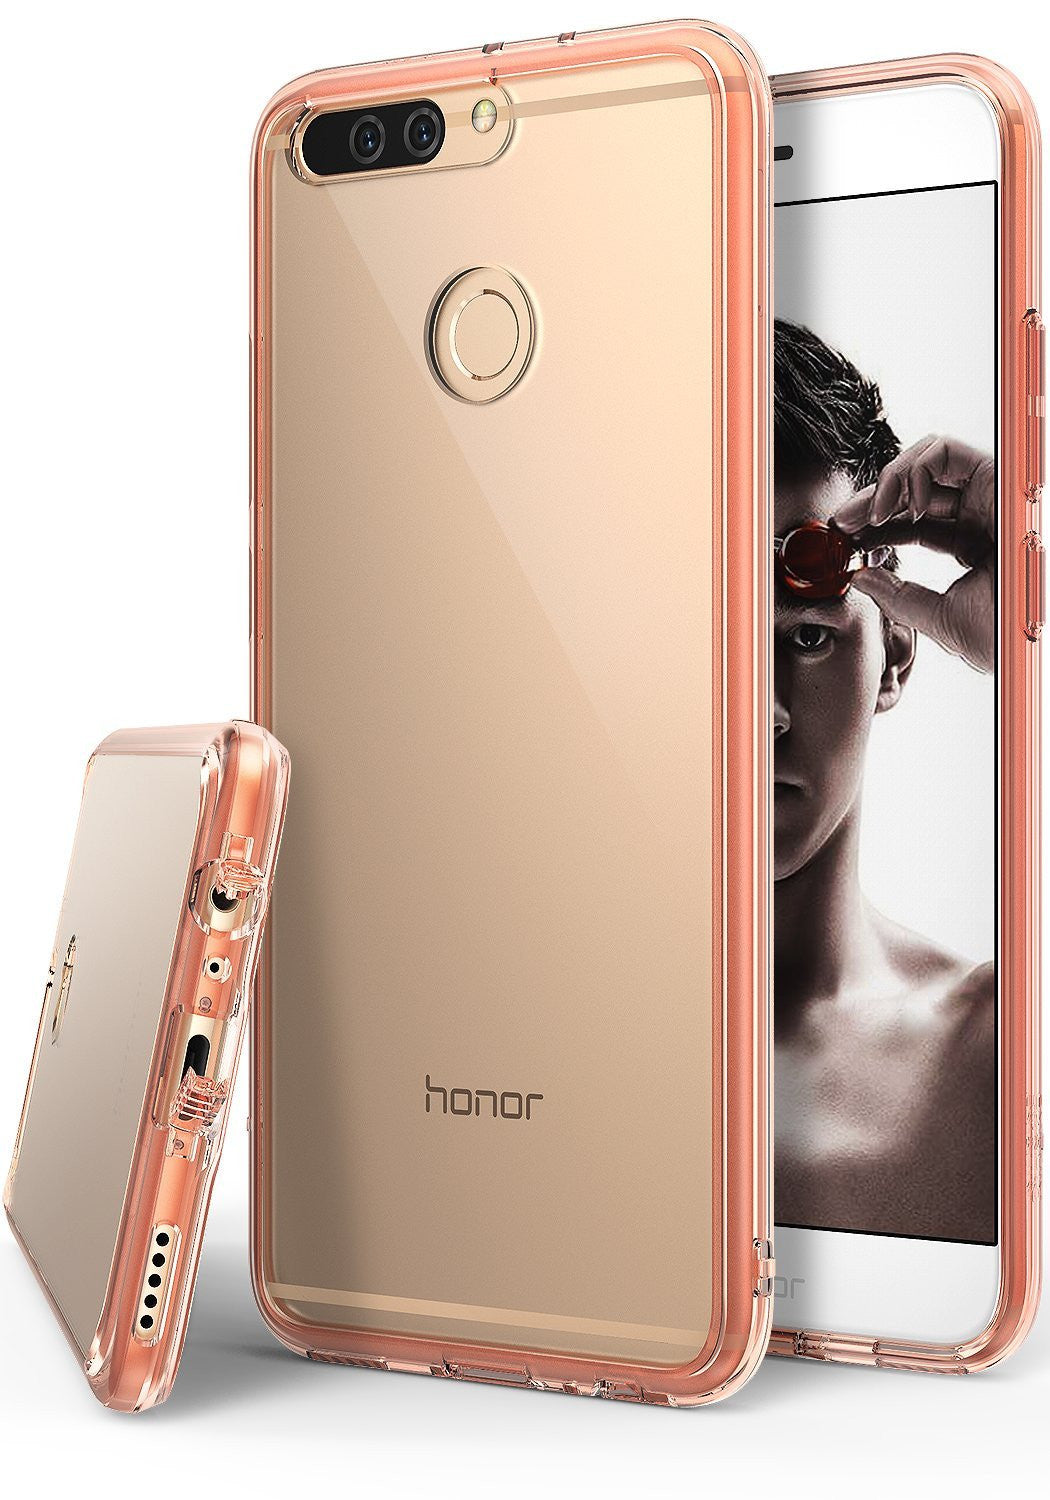 huawei honor 8 pro honor v9 case ringke fusion case crystal clear pc back tpu bumper case rose gold crystal